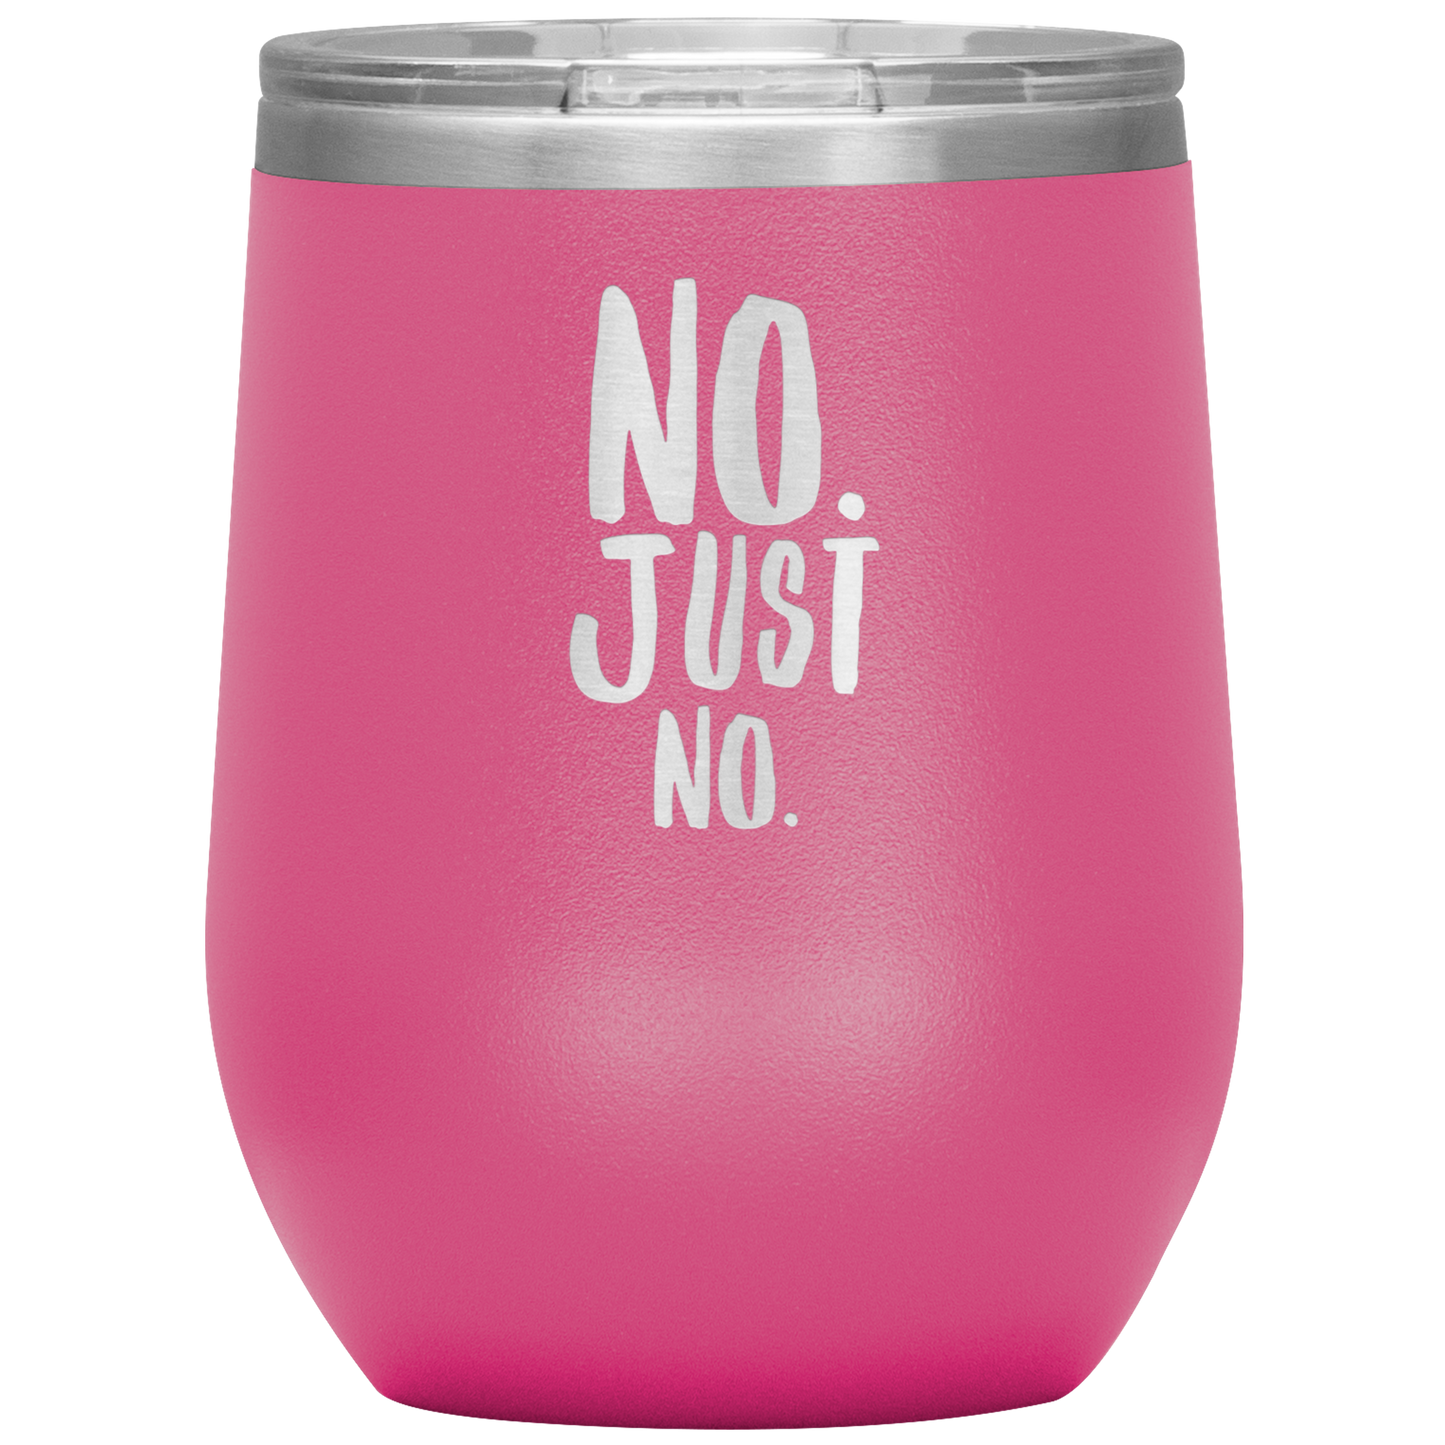 "No. Just No." 12 oz. Insulated Stainless Steel Wine Tumbler with Lid